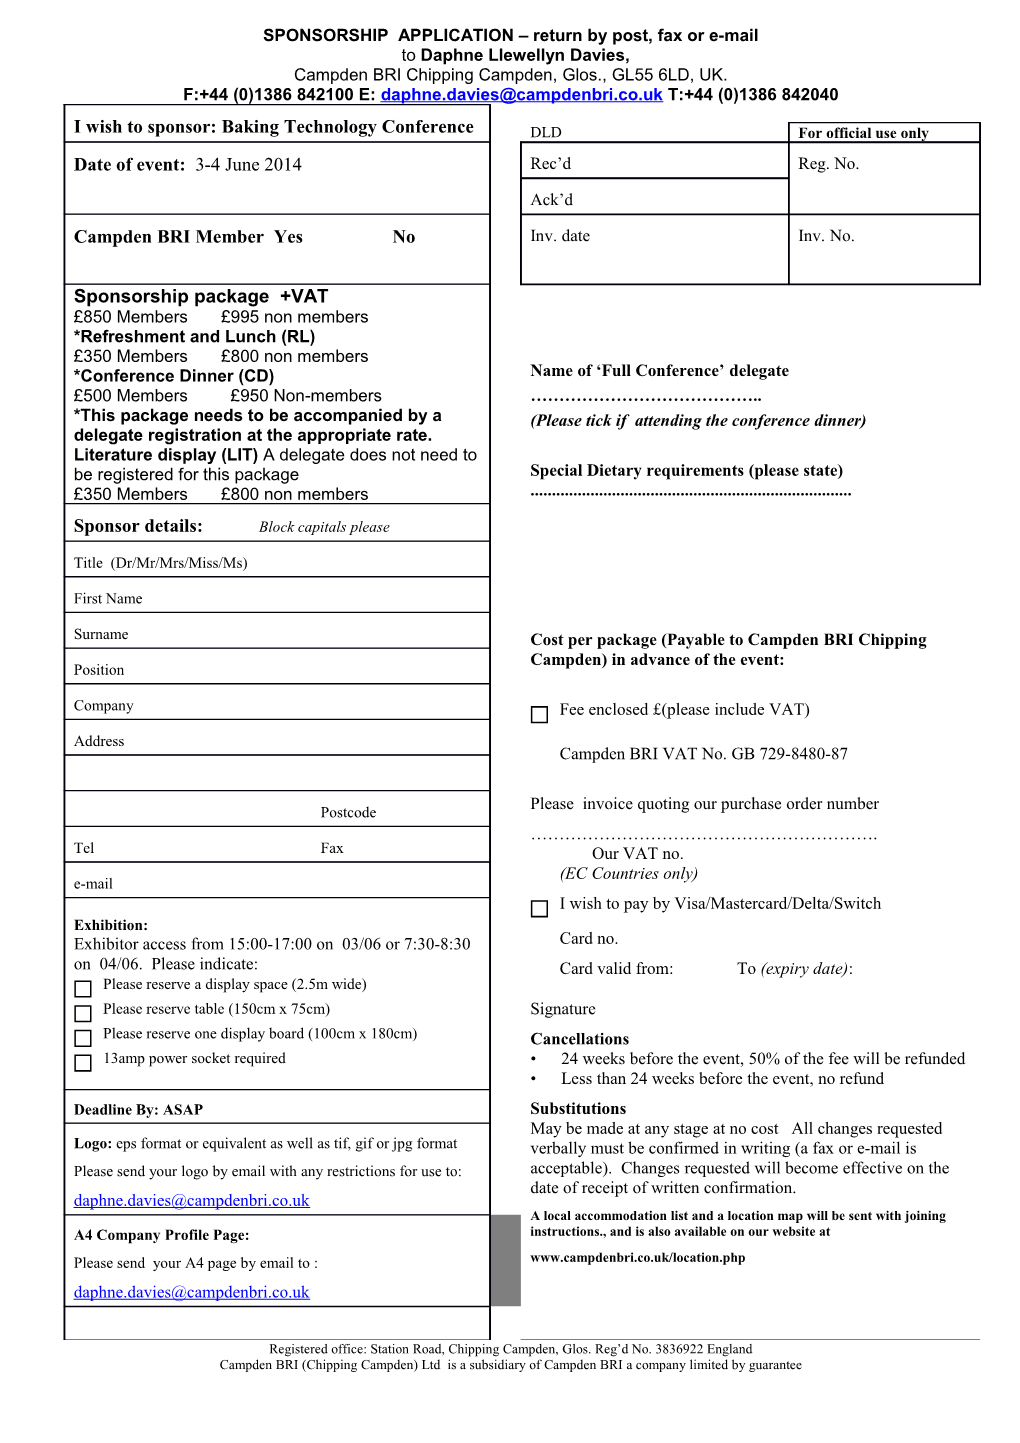 SPONSORSHIP APPLICATION Return by Post, Fax Or E-Mail